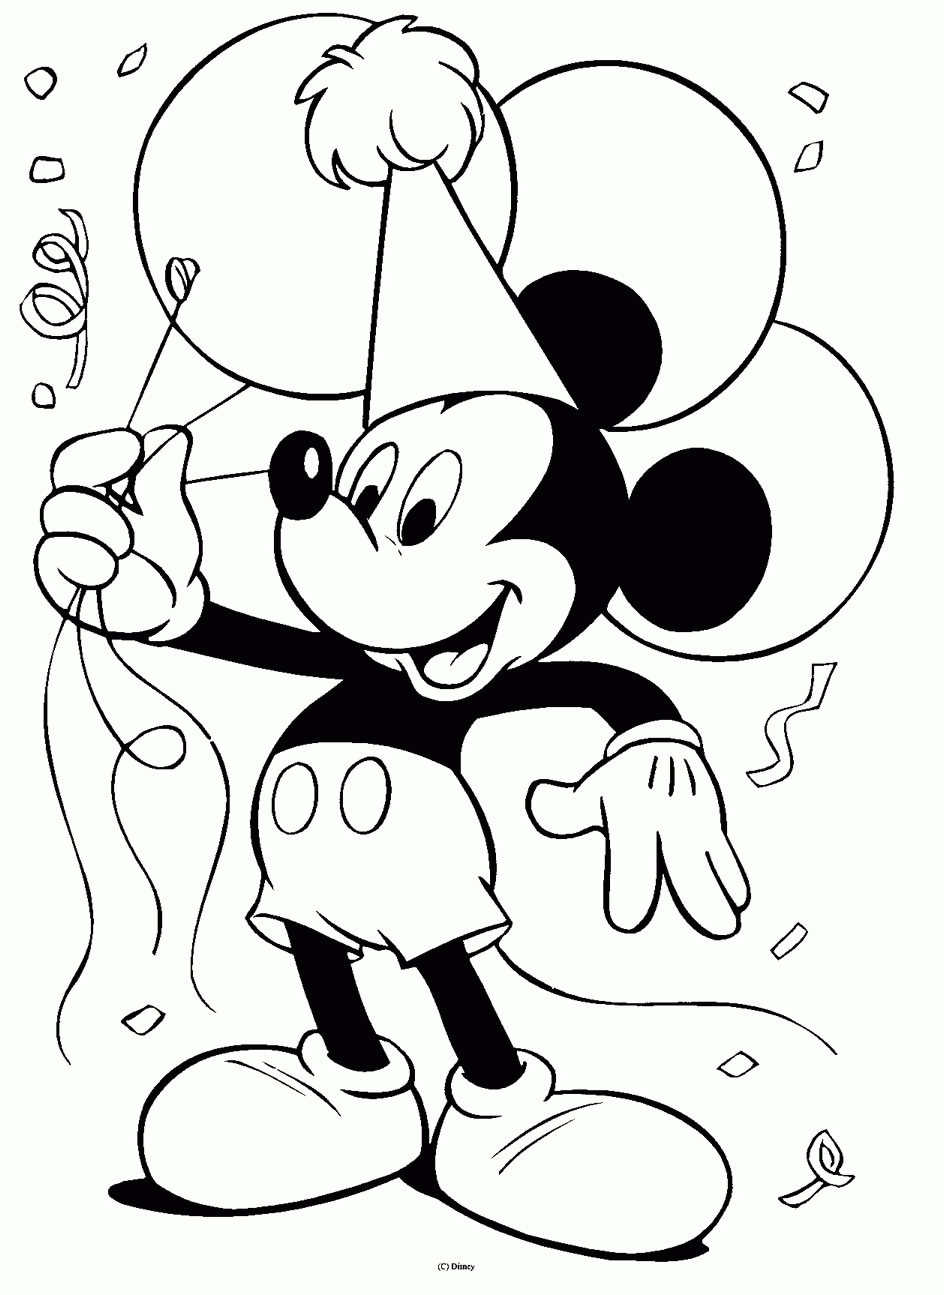 Download Colour Me Beautiful: Mickey & Friends Colouring Pages